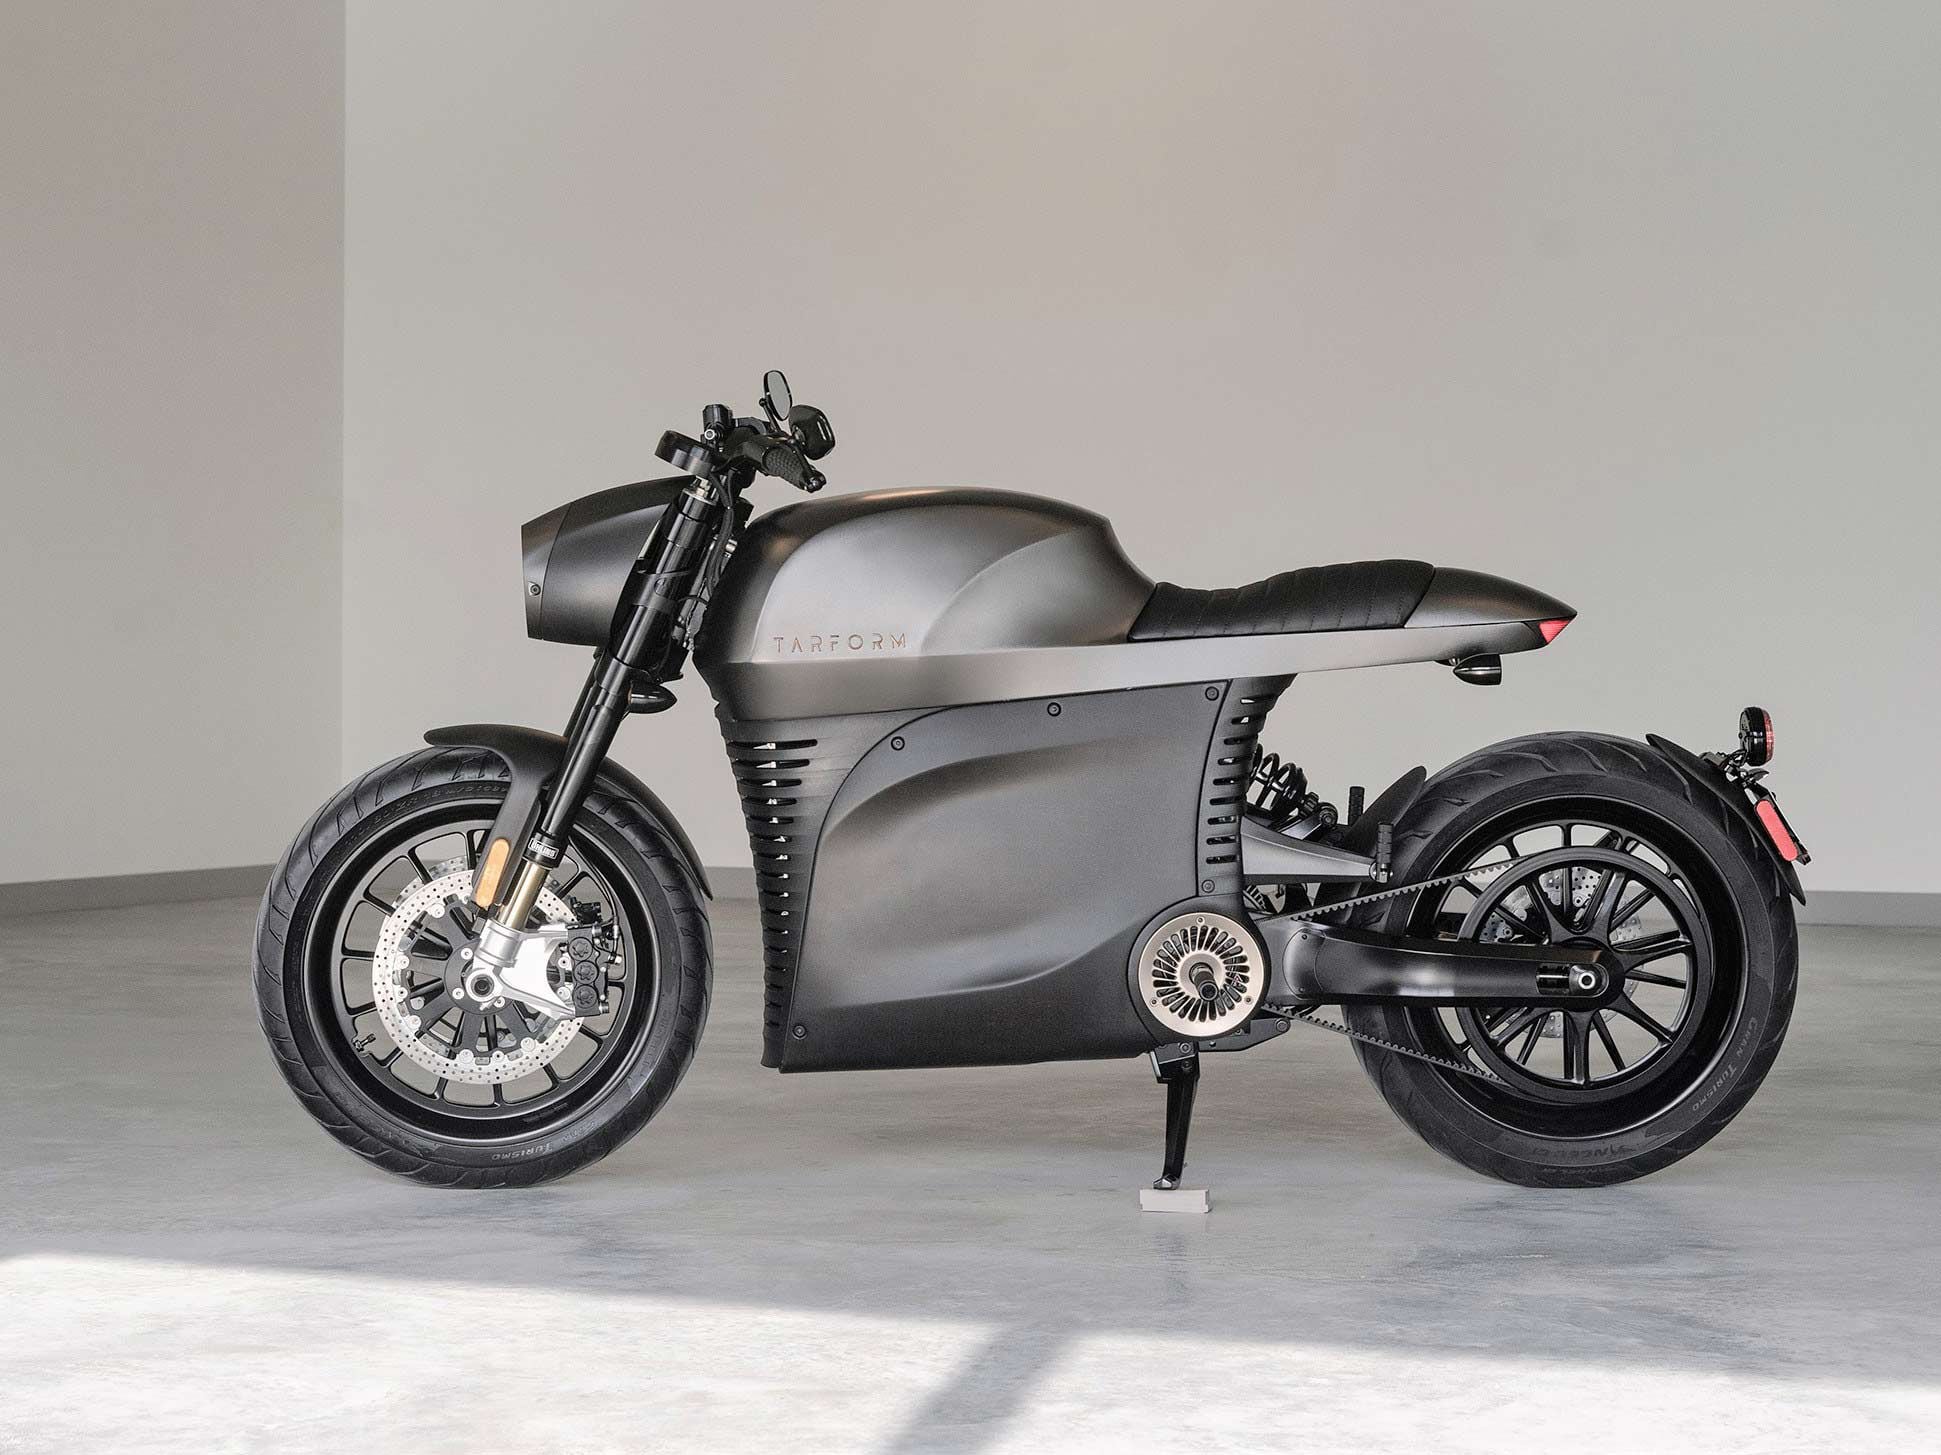 Tarform Motorcycles is delivering its first run of production models to customers. Shown is the Tarform Luna Founder Edition.